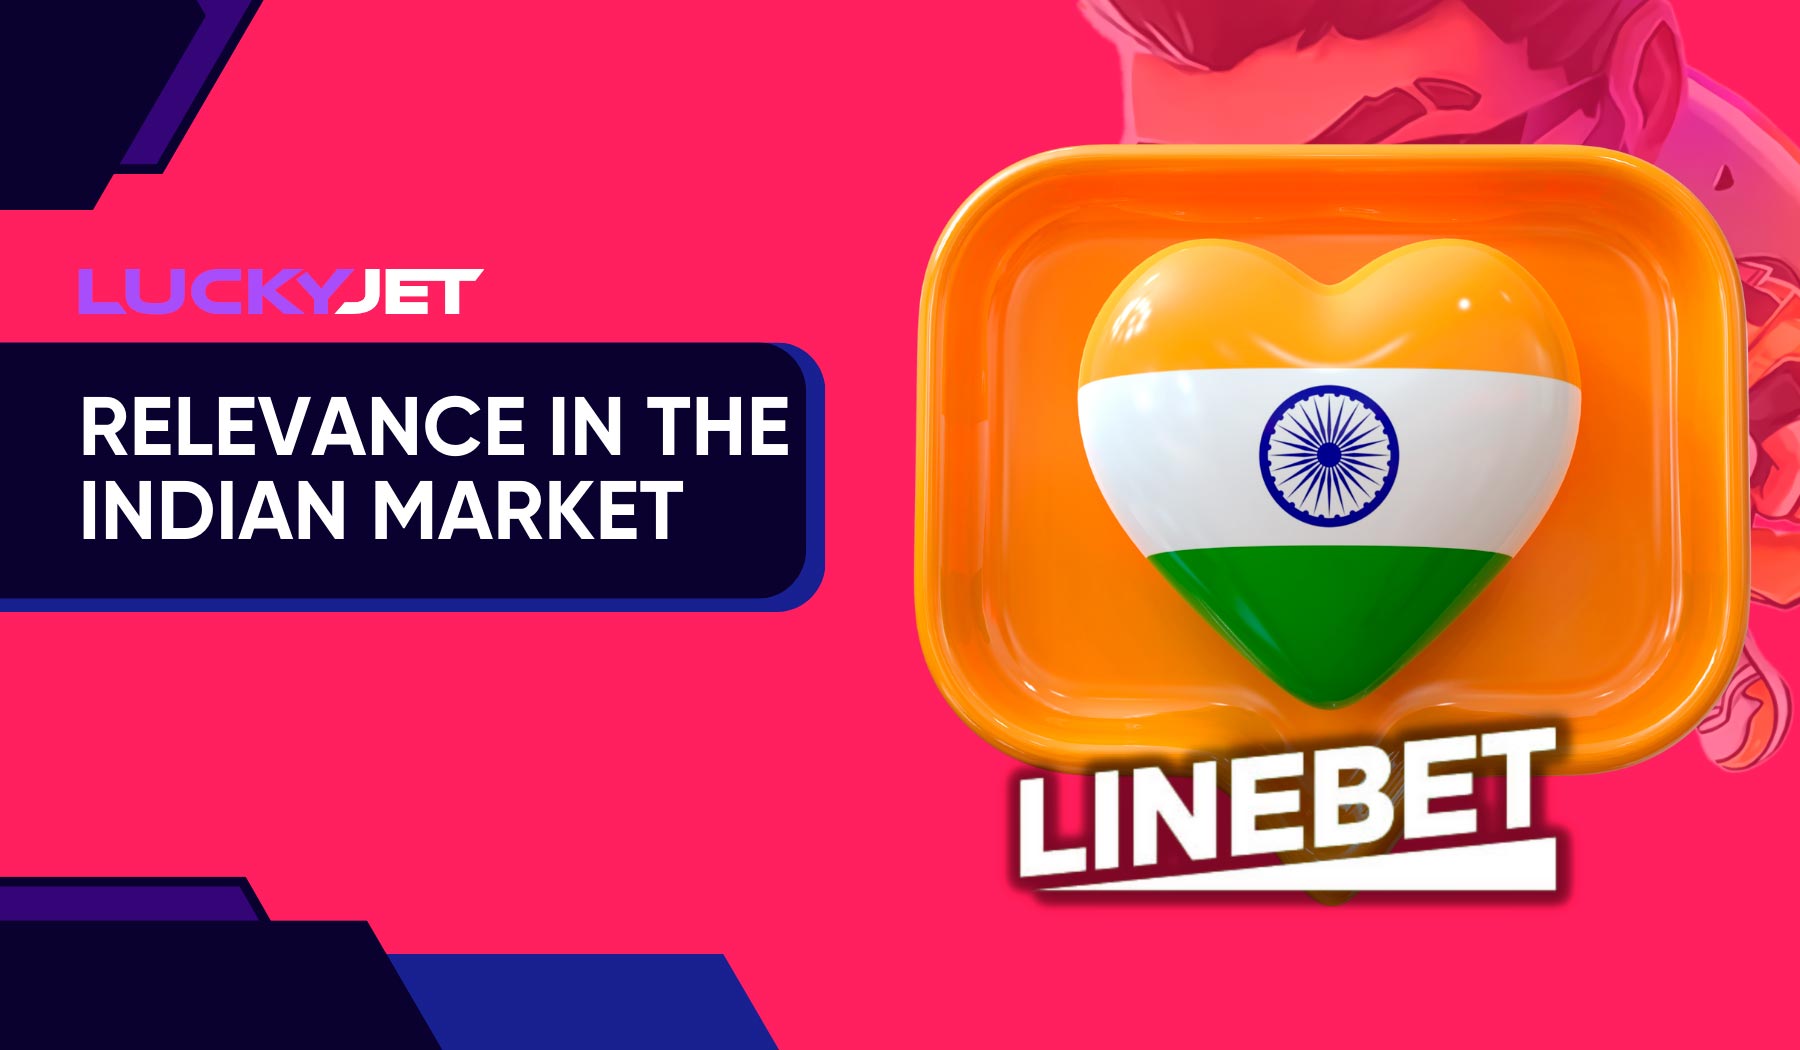 Linebet Jet Parimatch in the Indian market